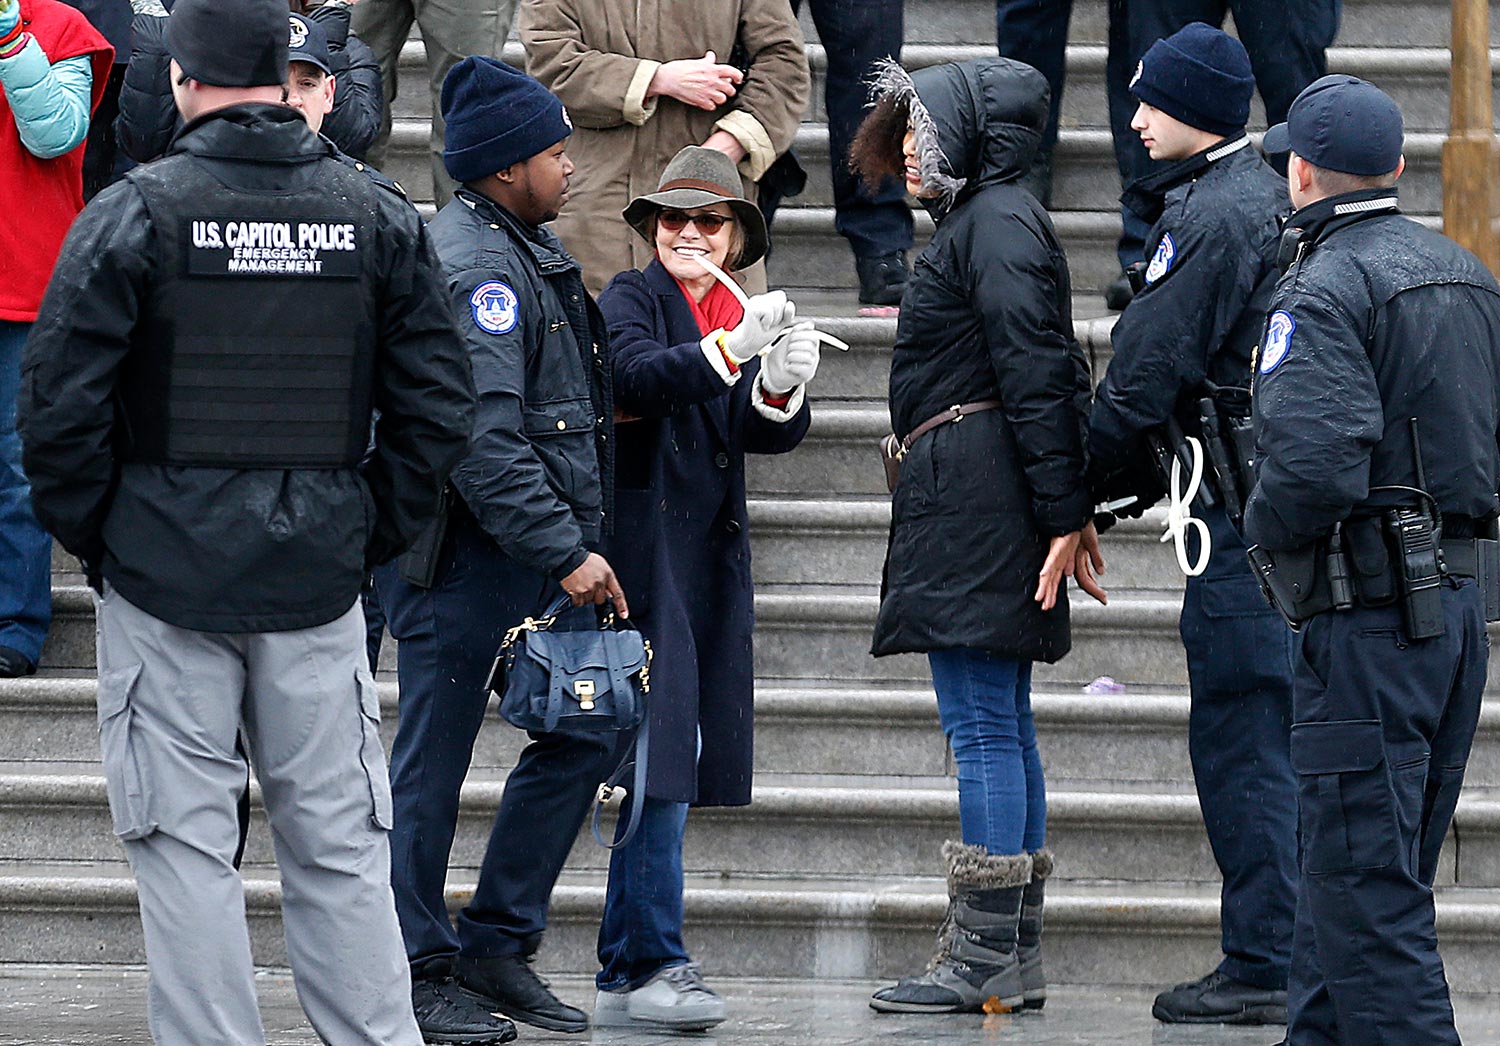 Sally Field arrested while triumphantly supporting Jane Fonda's climate change protest